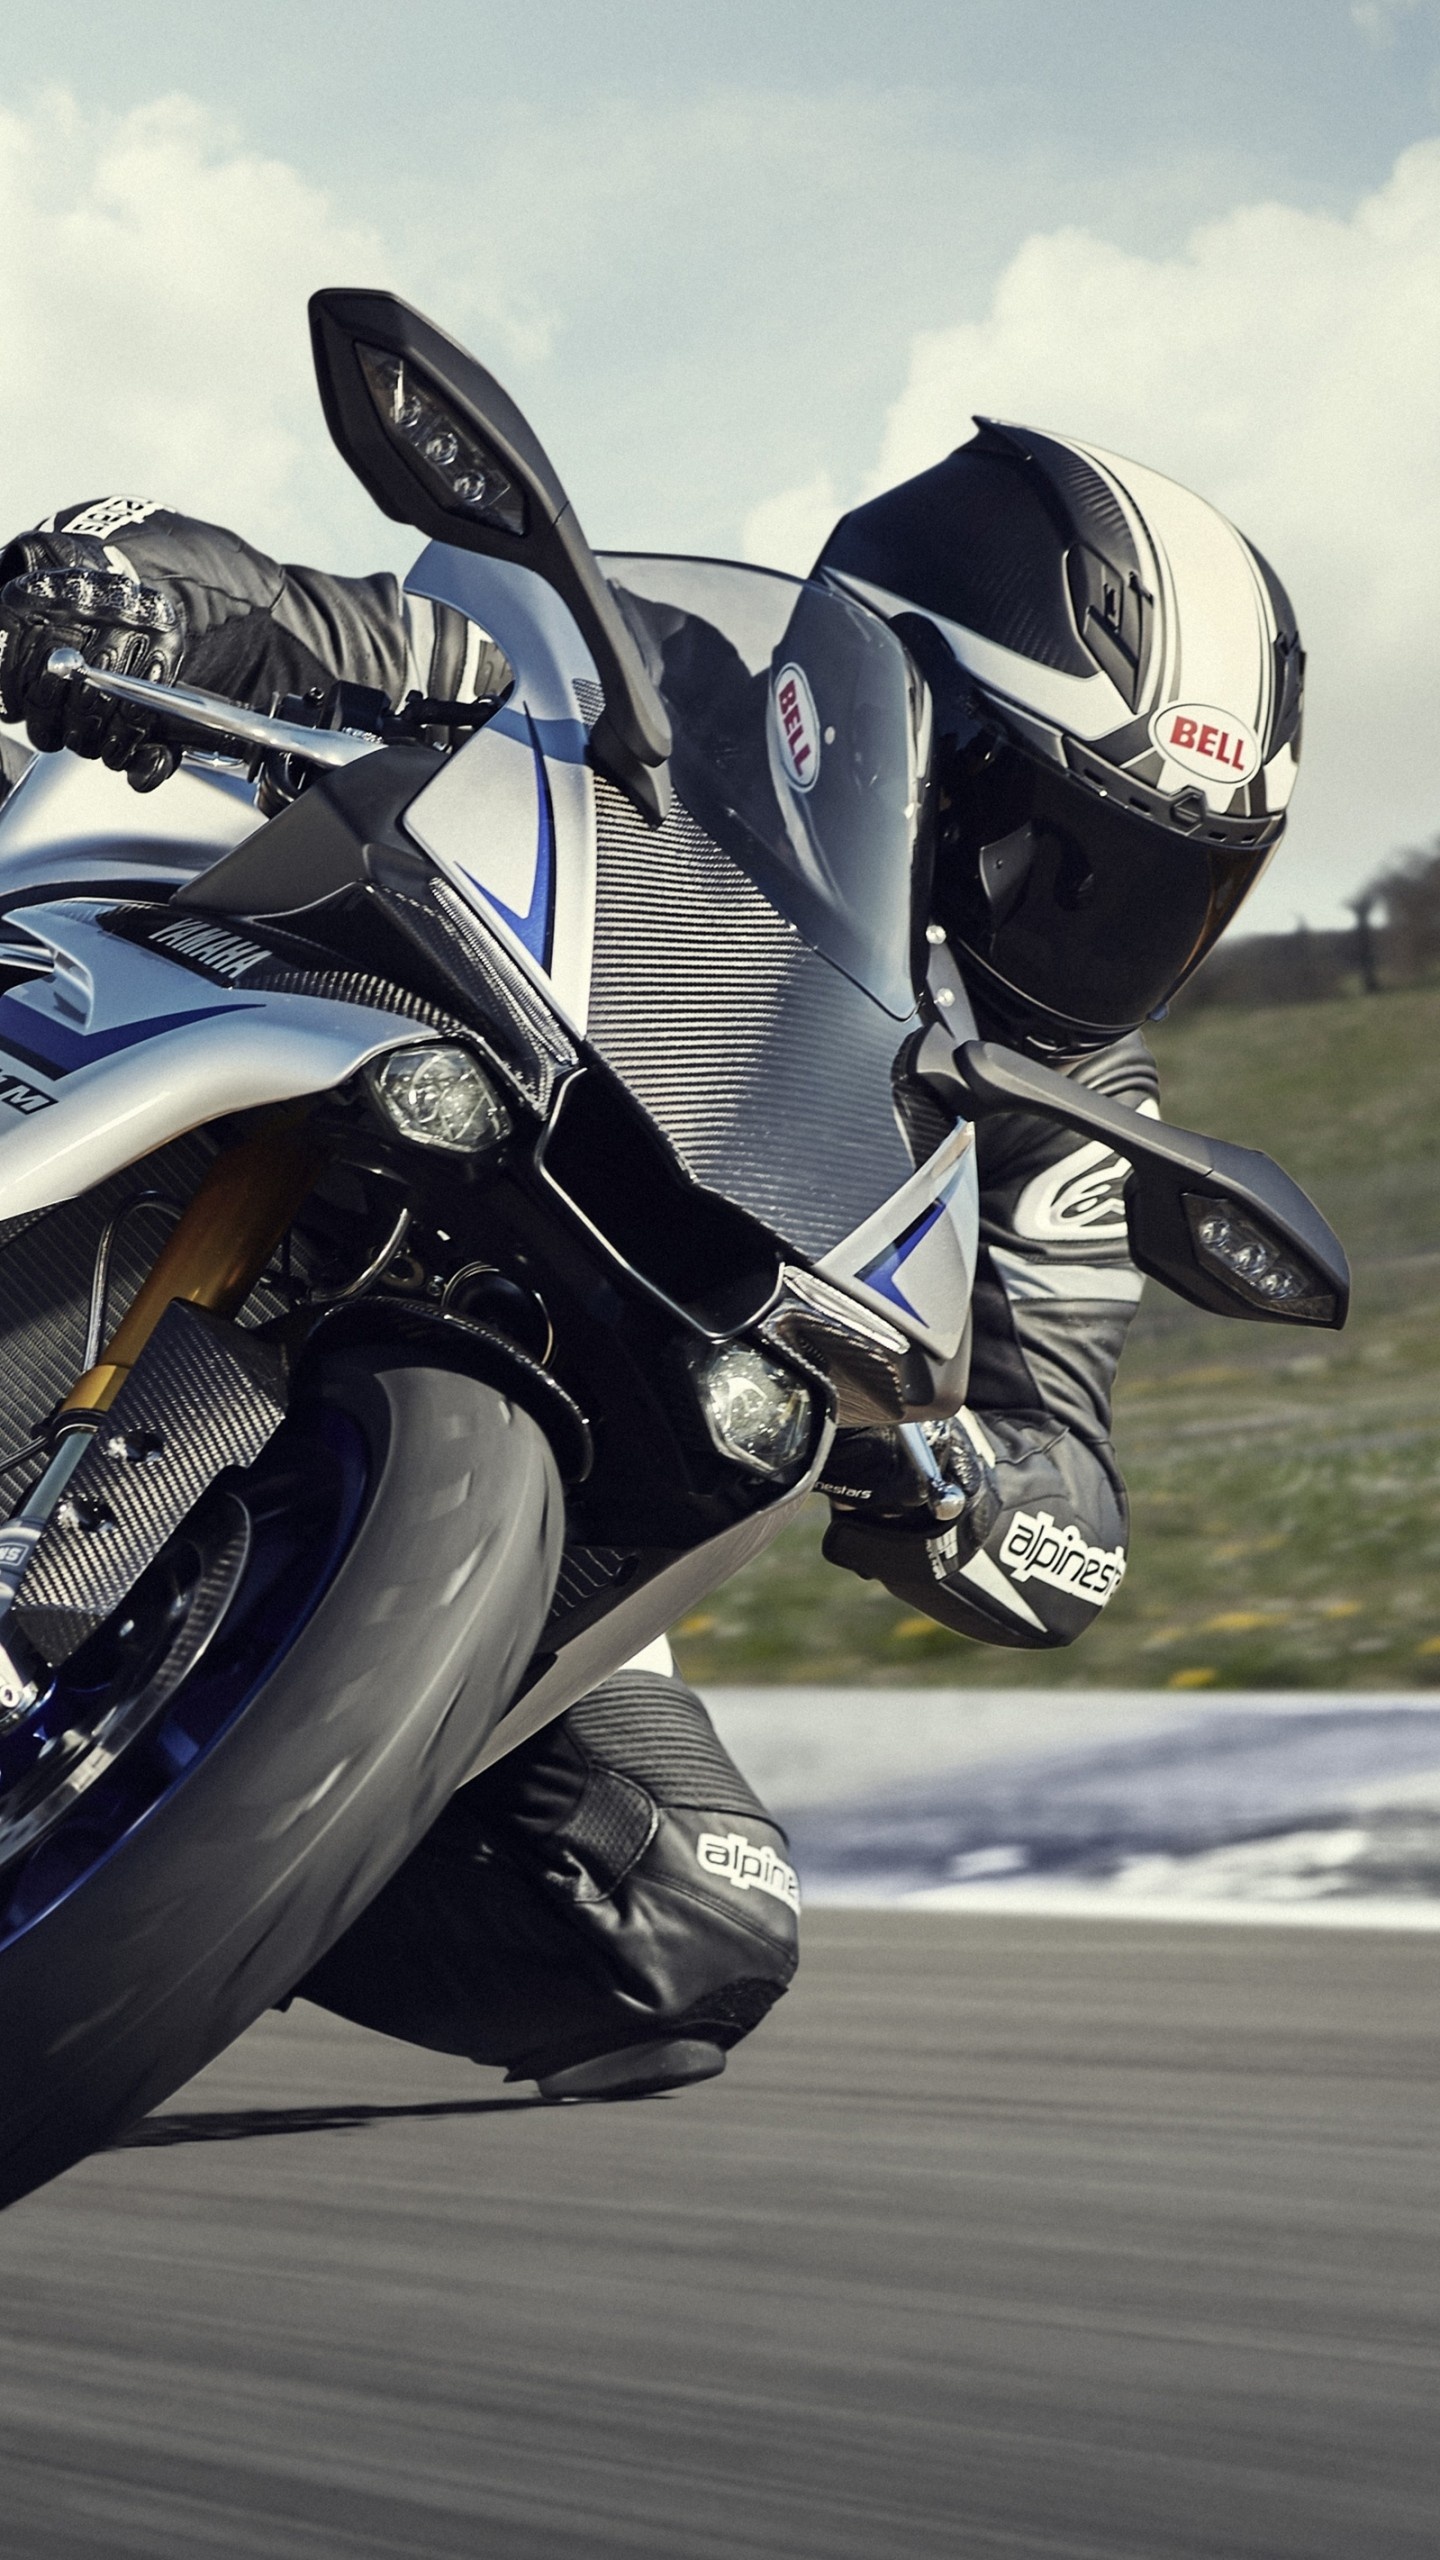 Motorcycle Racing: Yamaha YZF-R1, Bell, Alpinestars Special Gear, Race Track. 1440x2560 HD Background.